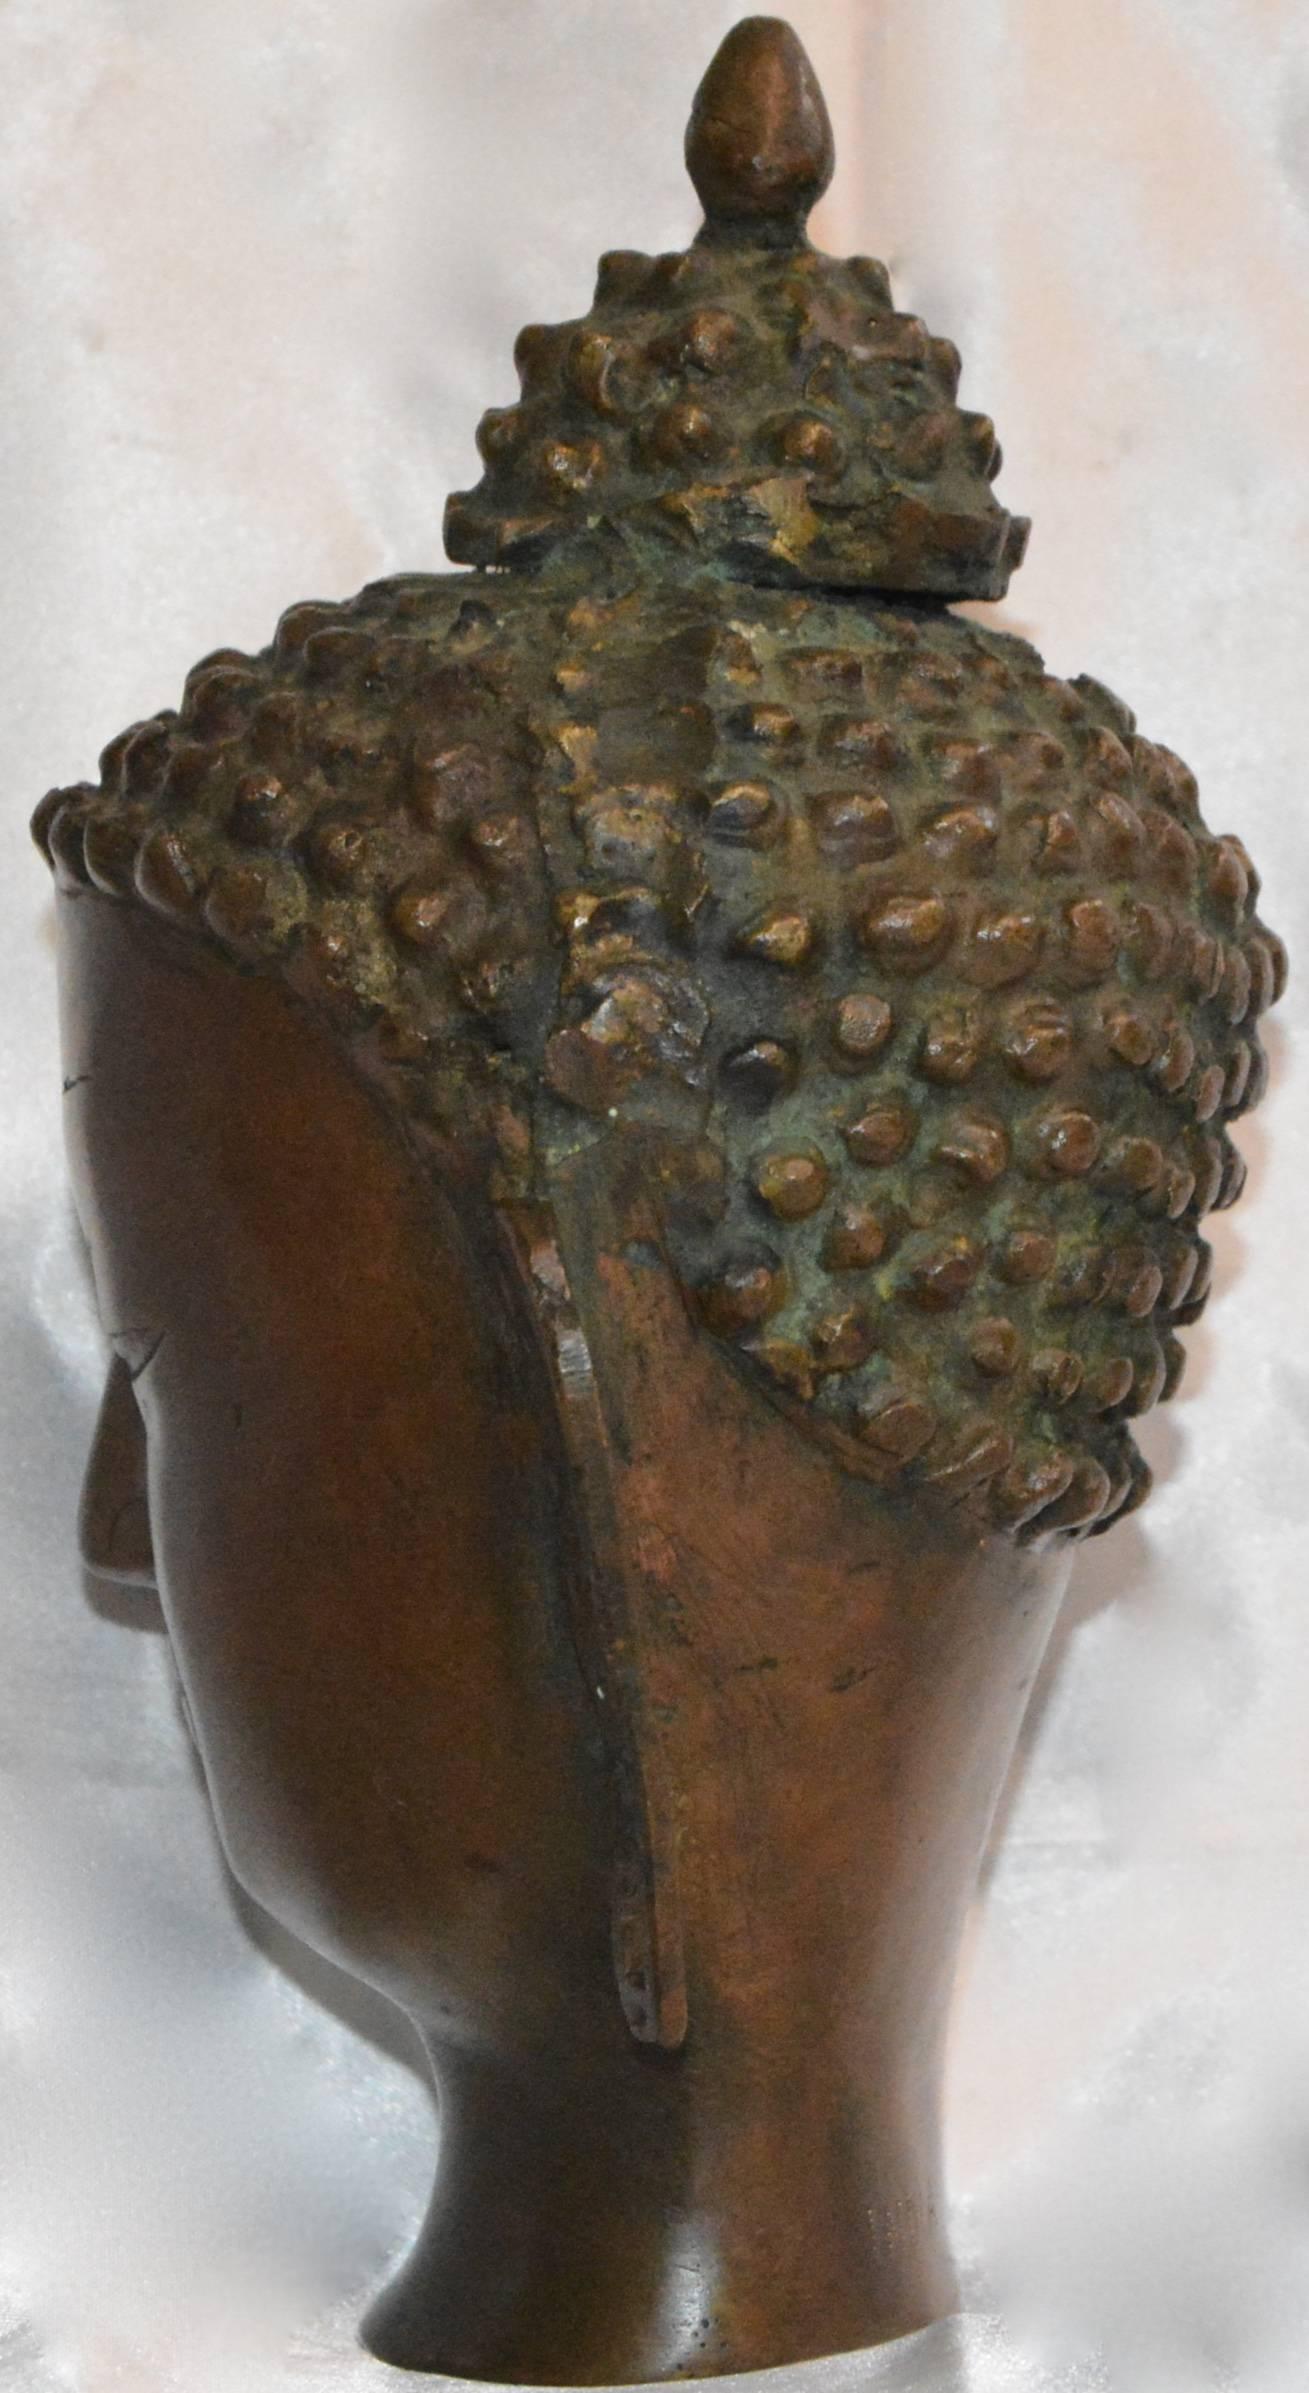 This is a stunning Thai bronze head figurine. It depicts a Buddha with elongated ears, tight curls and the ushnisha on top of its head. No visible maker’s marks. It is stamped India on the back.